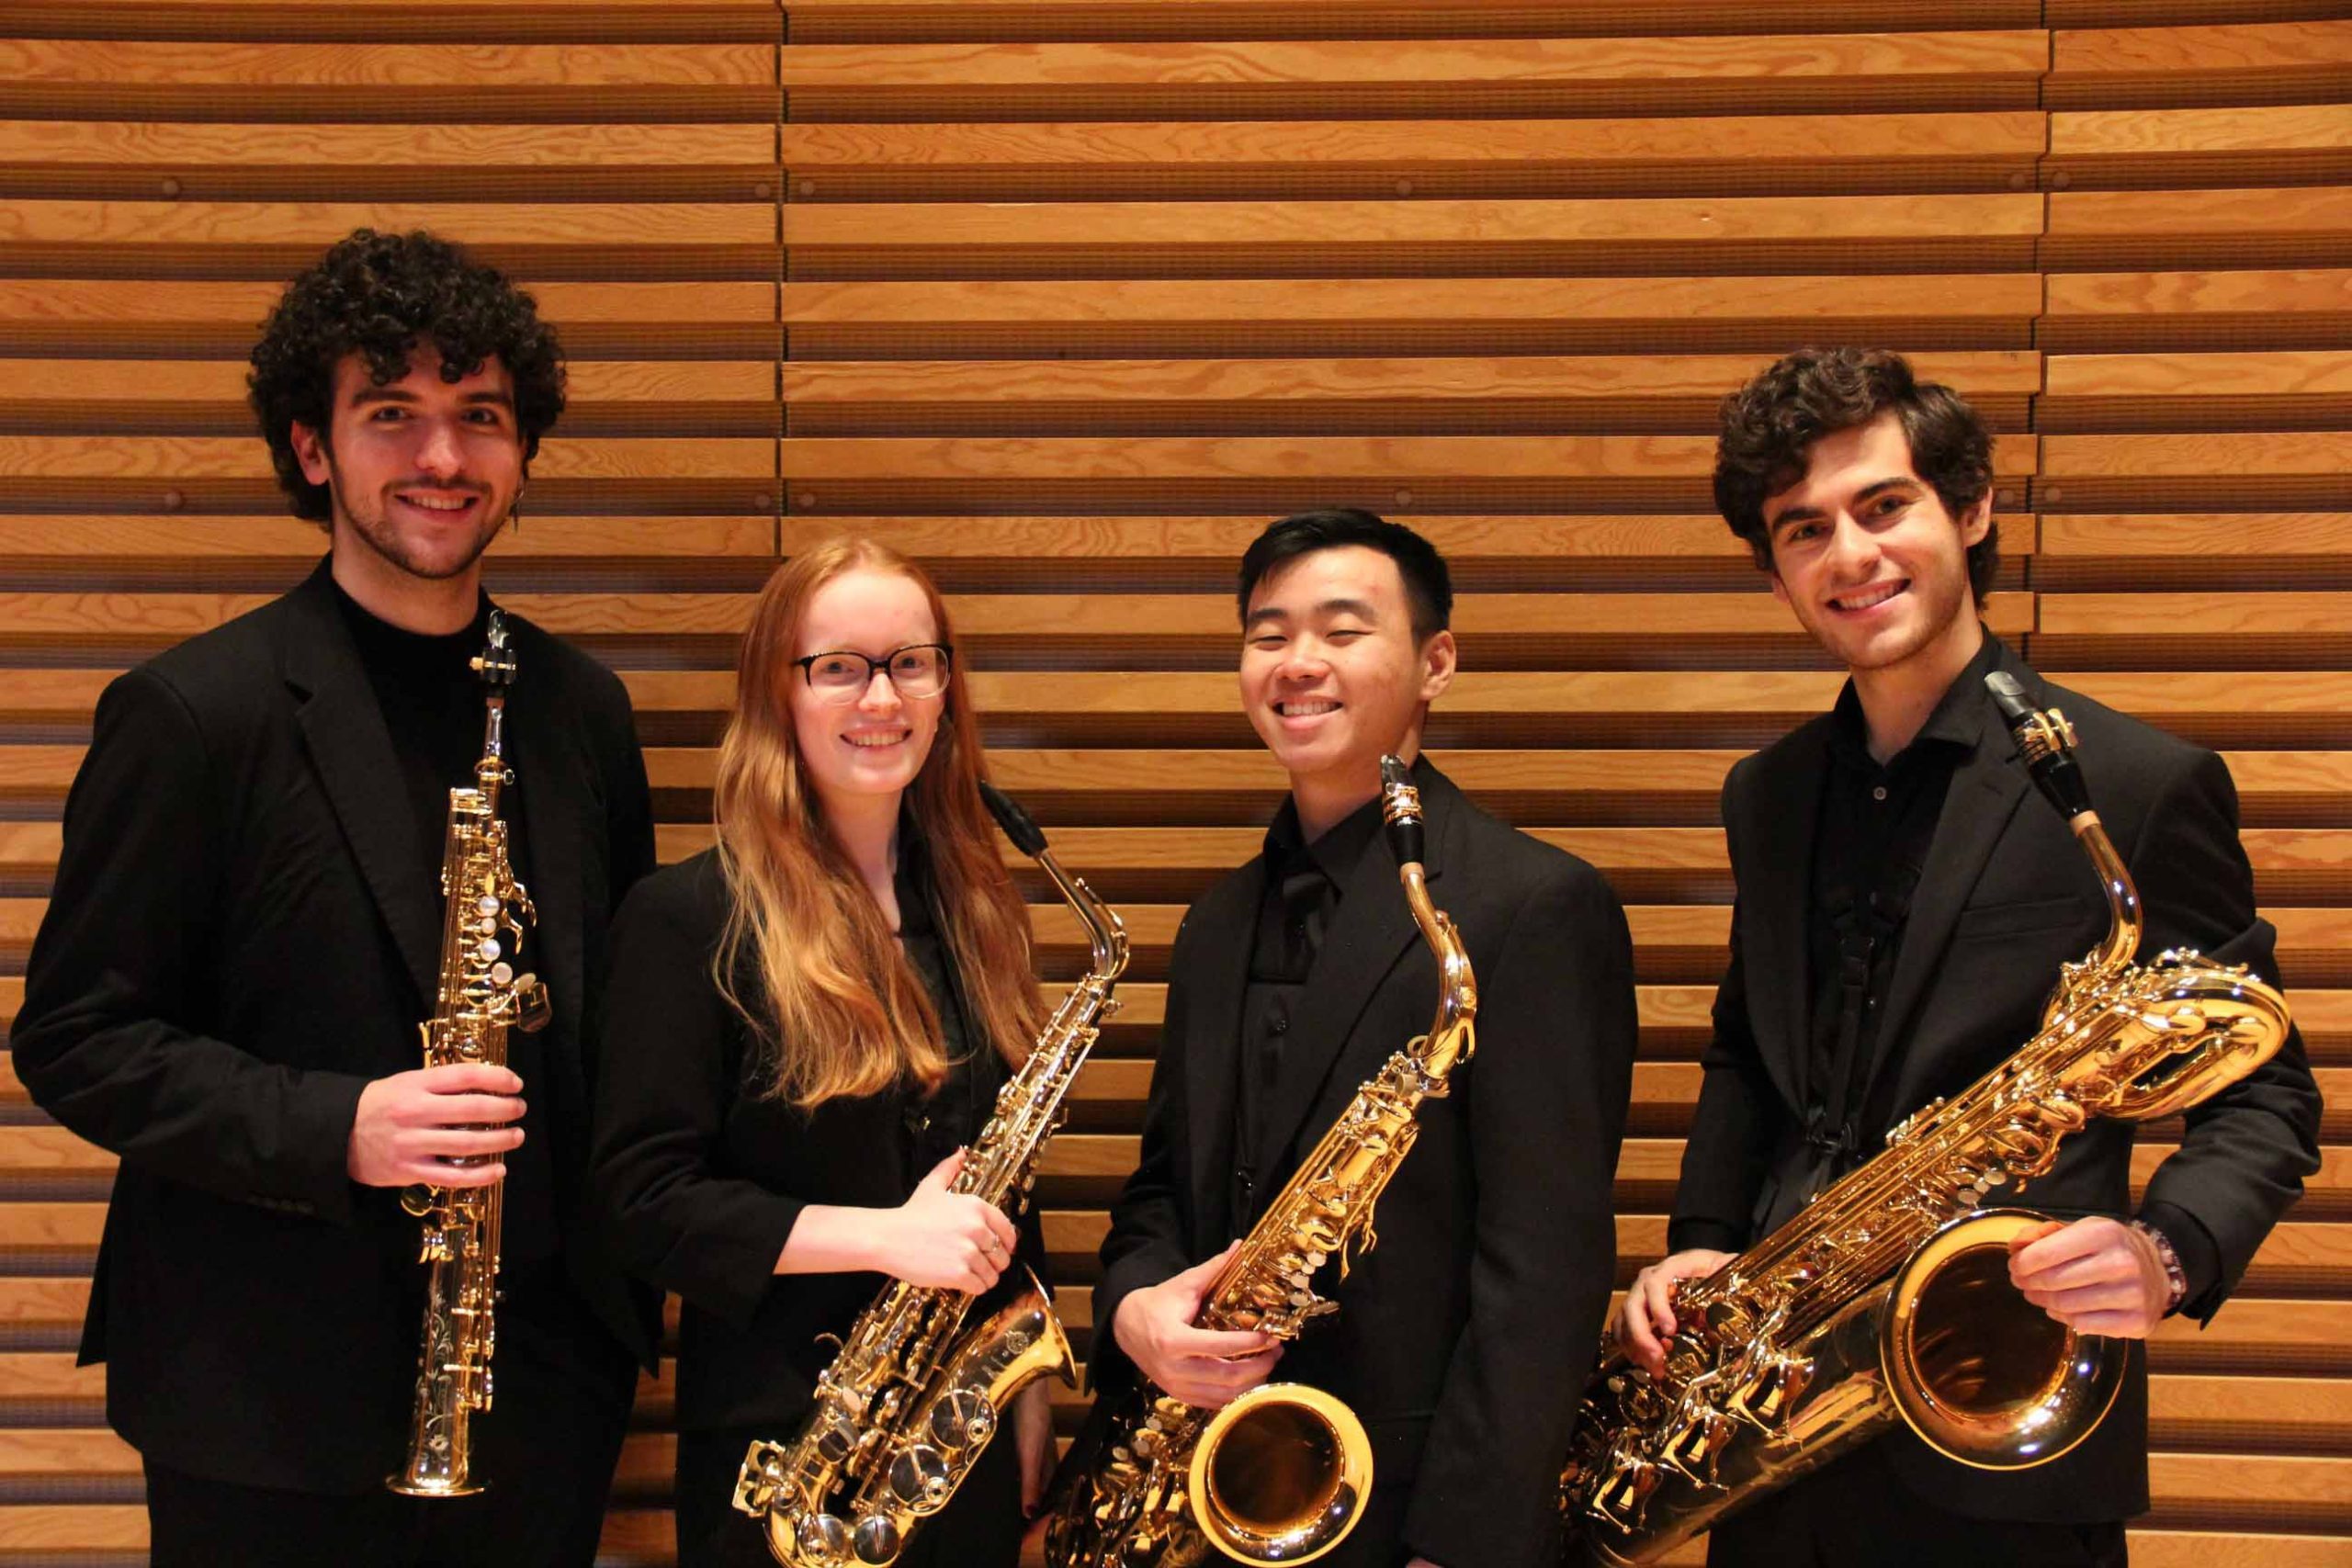 Four saxophonists wearing black stand posing, holding their instruments